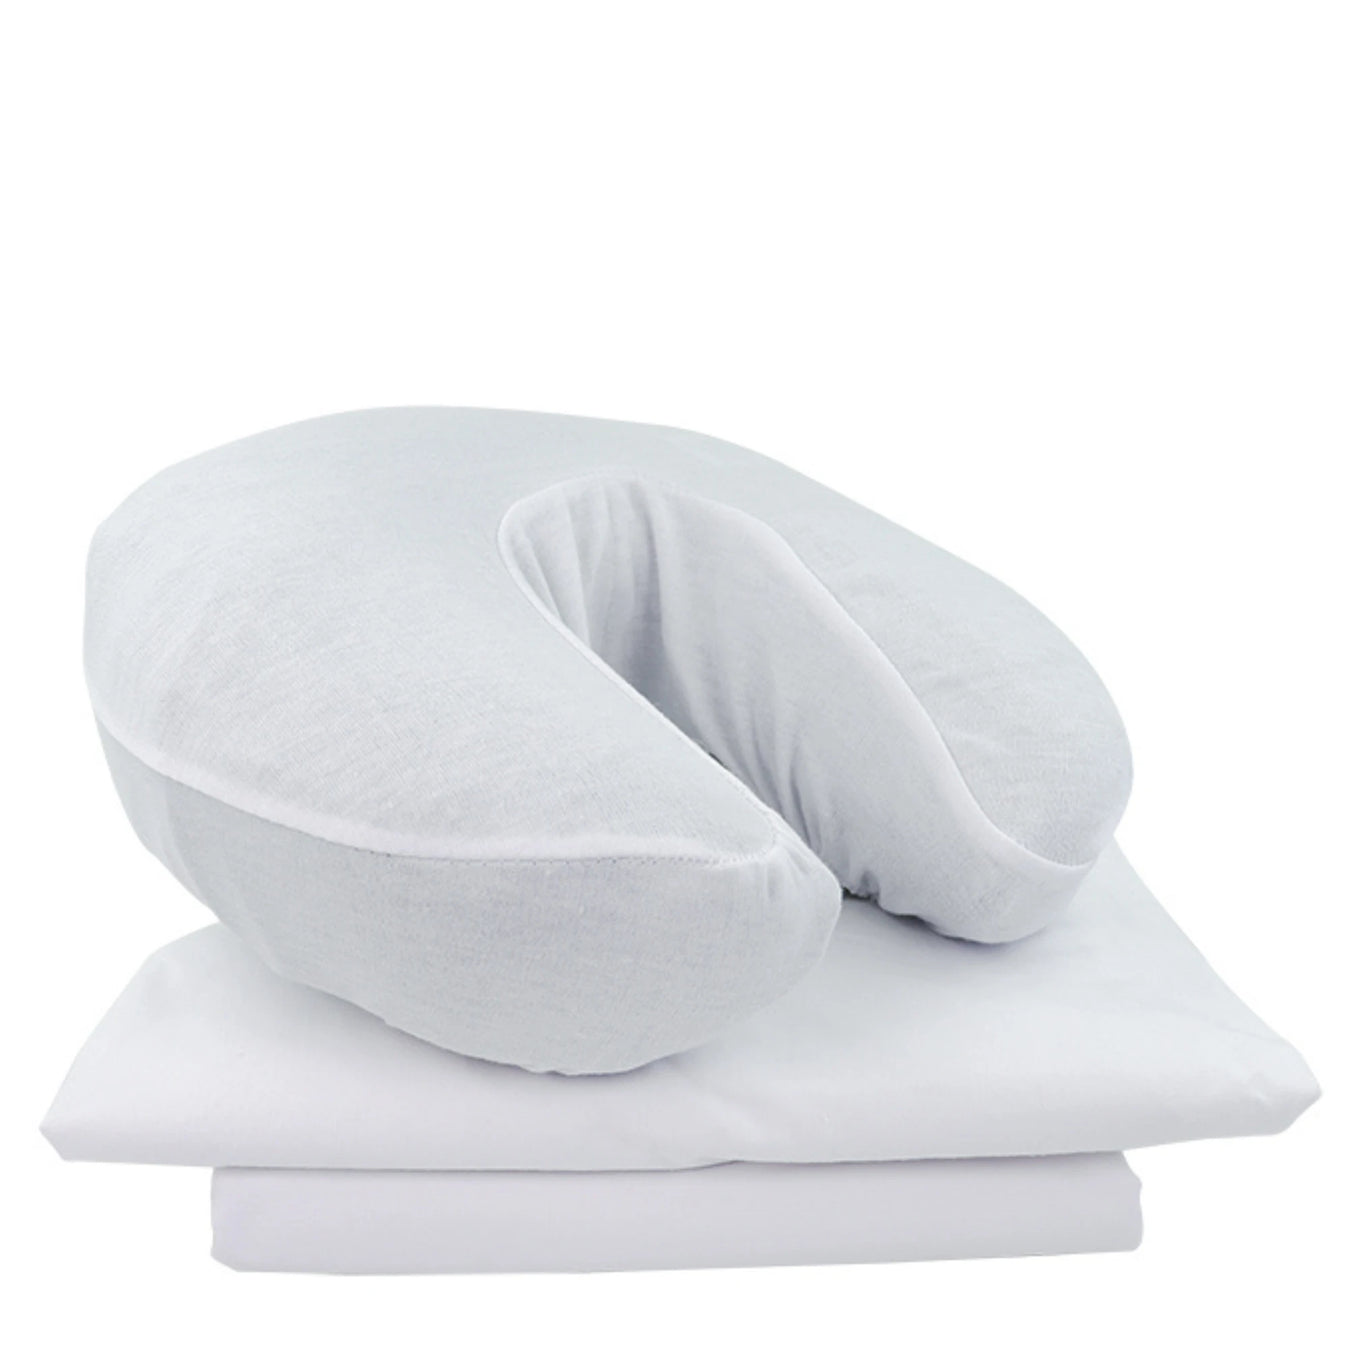 Canada's largest selection of Massage Table Sheets